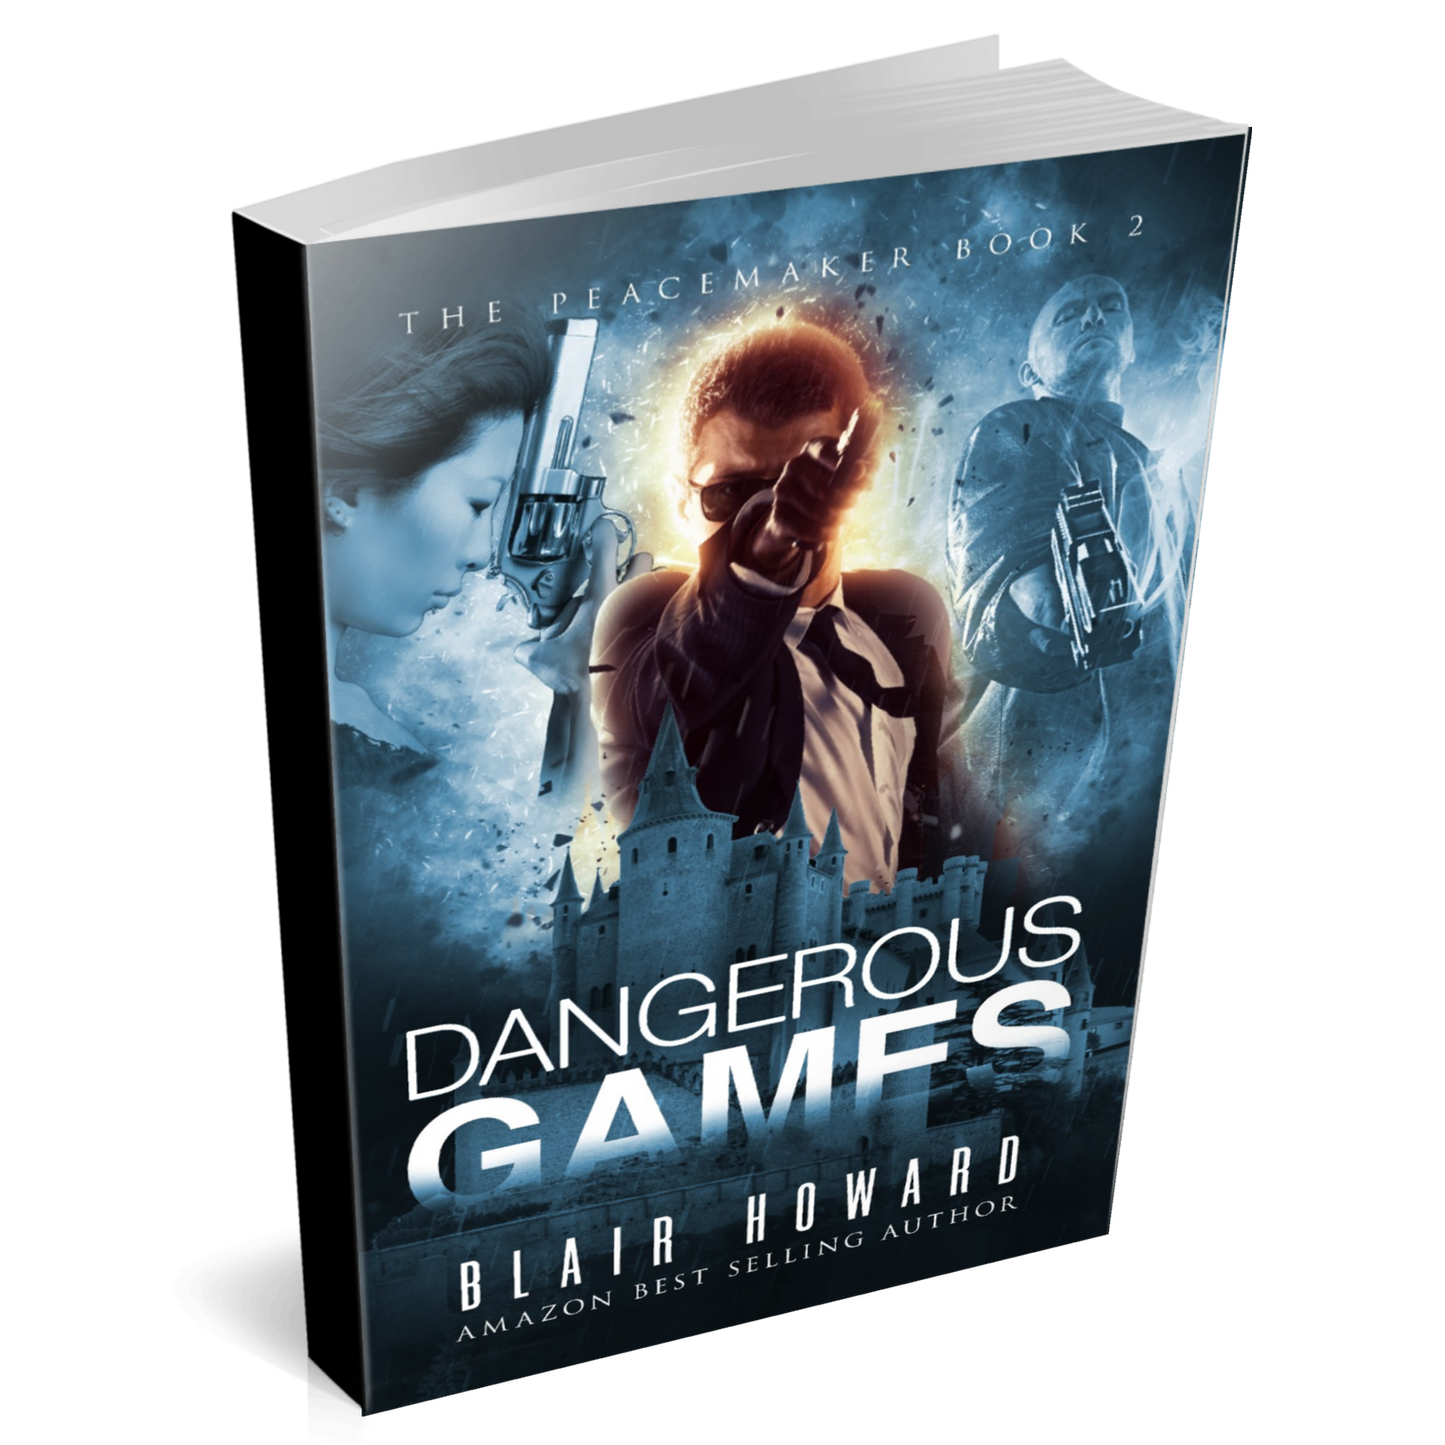 Dangerous Games (The Peacemaker Book 2)